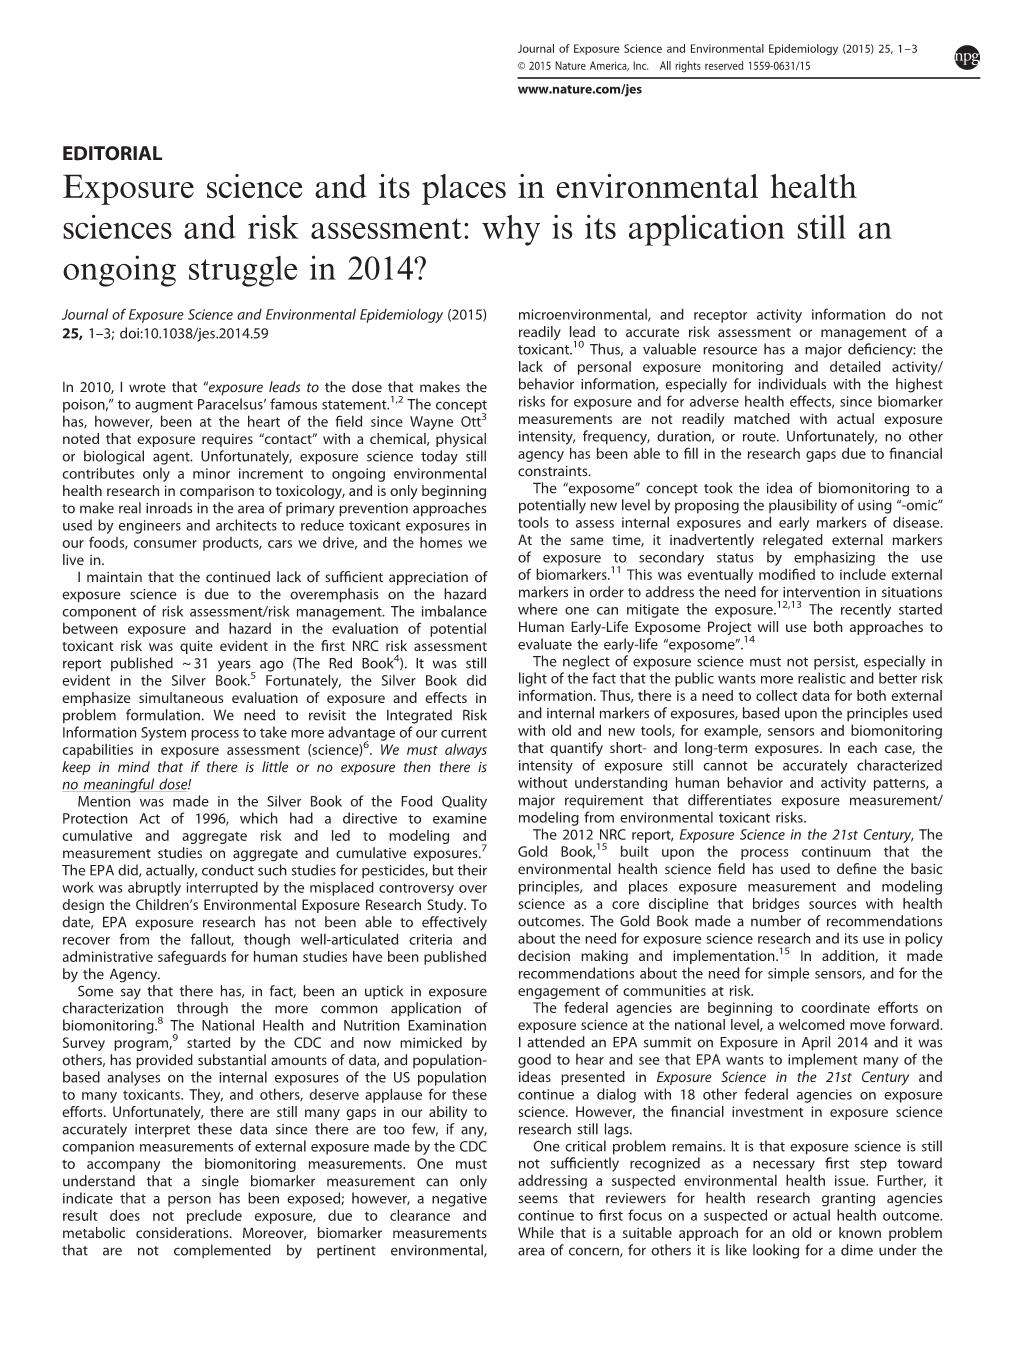 Exposure Science and Its Places in Environmental Health Sciences and Risk Assessment: Why Is Its Application Still an Ongoing Struggle in 2014?